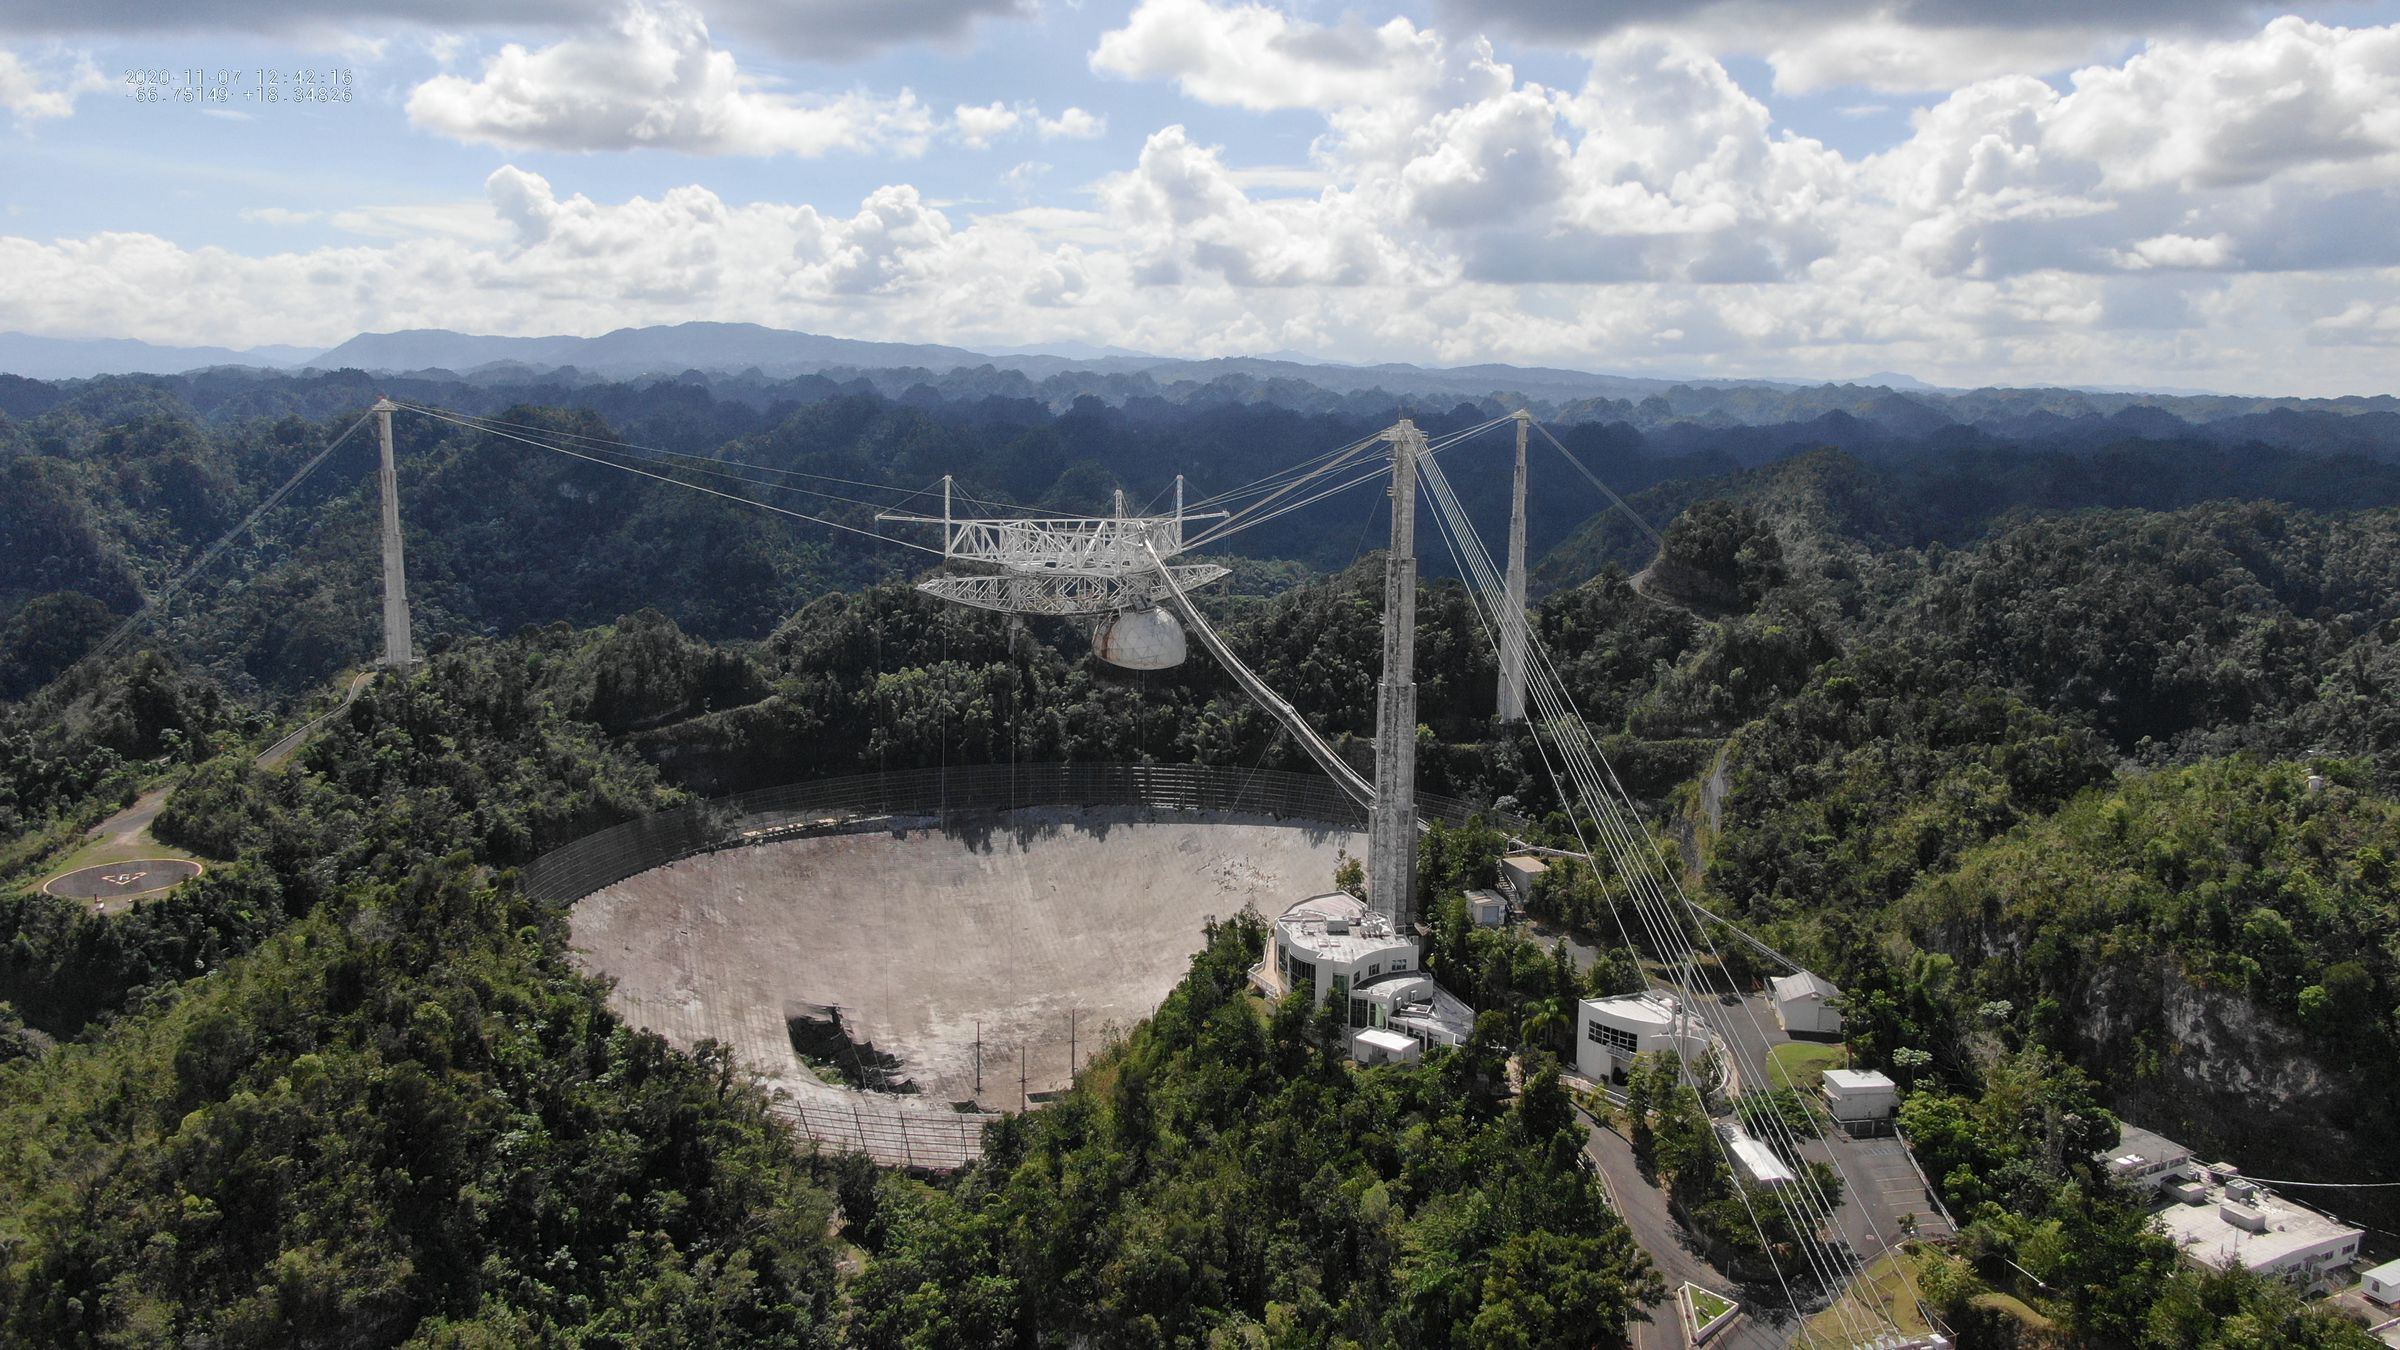 The Arecibo Observatory seen after the second cable failure